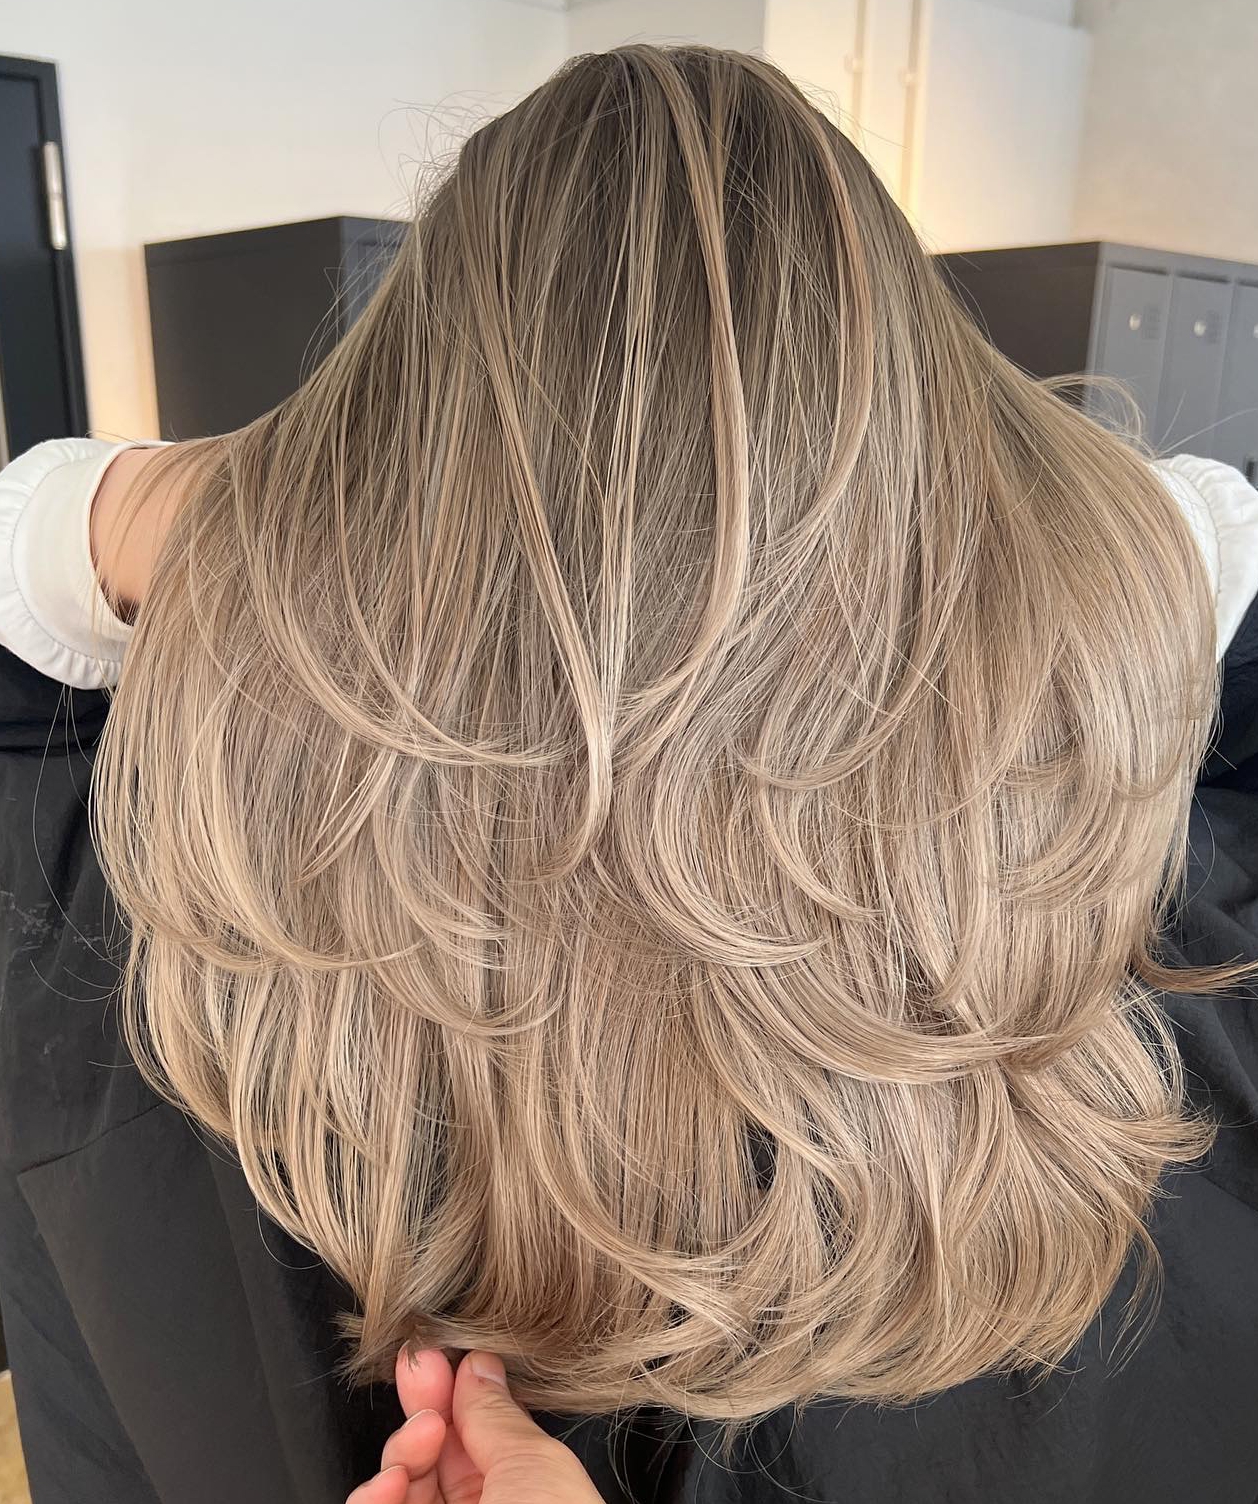 Butterfly Cut on Long Thick Blonde Hair